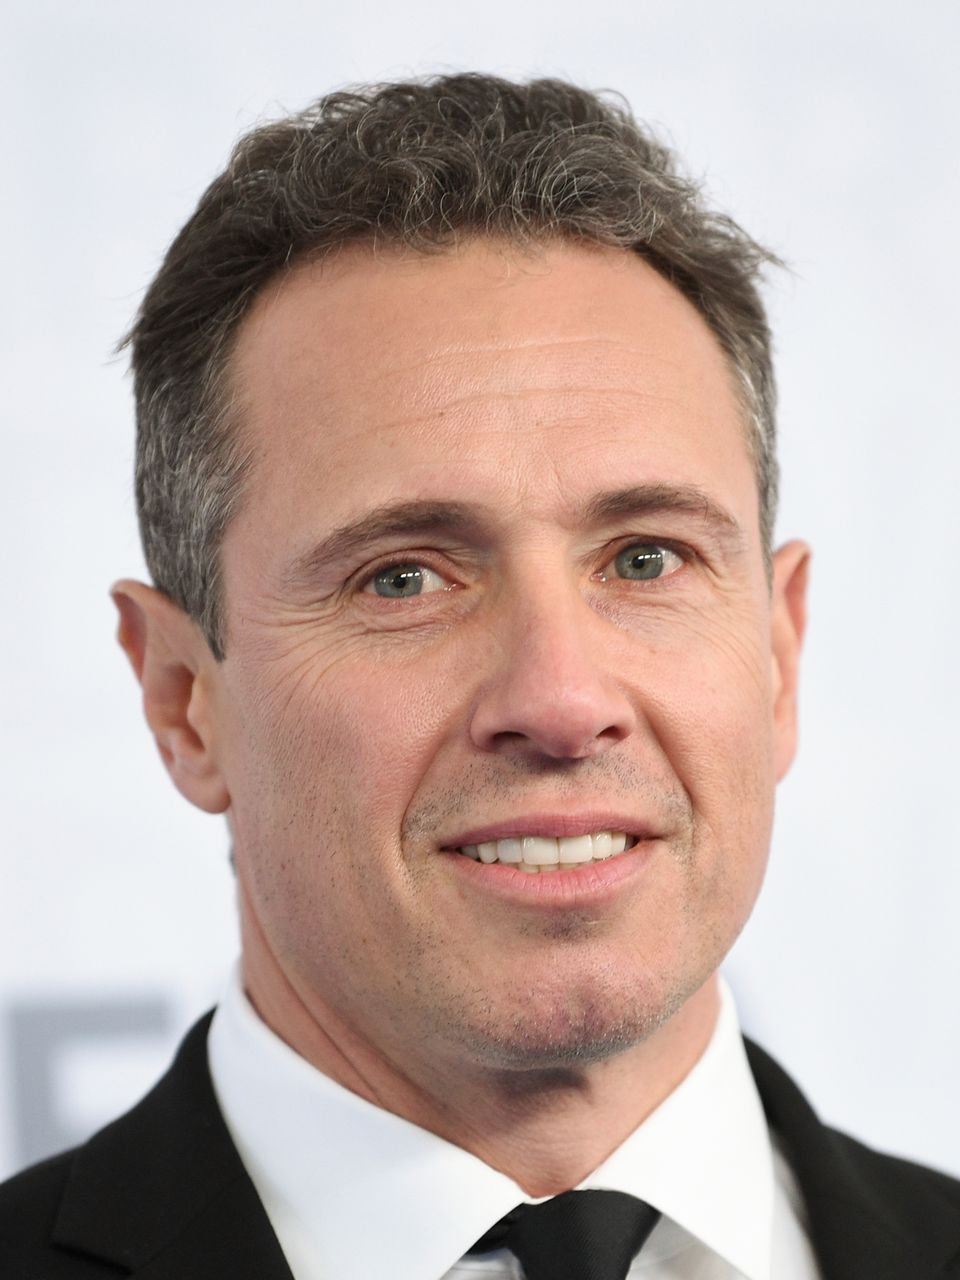 Cnn Anchor Chris Cuomo Says He S Frustrated At His Tv Role Kbak